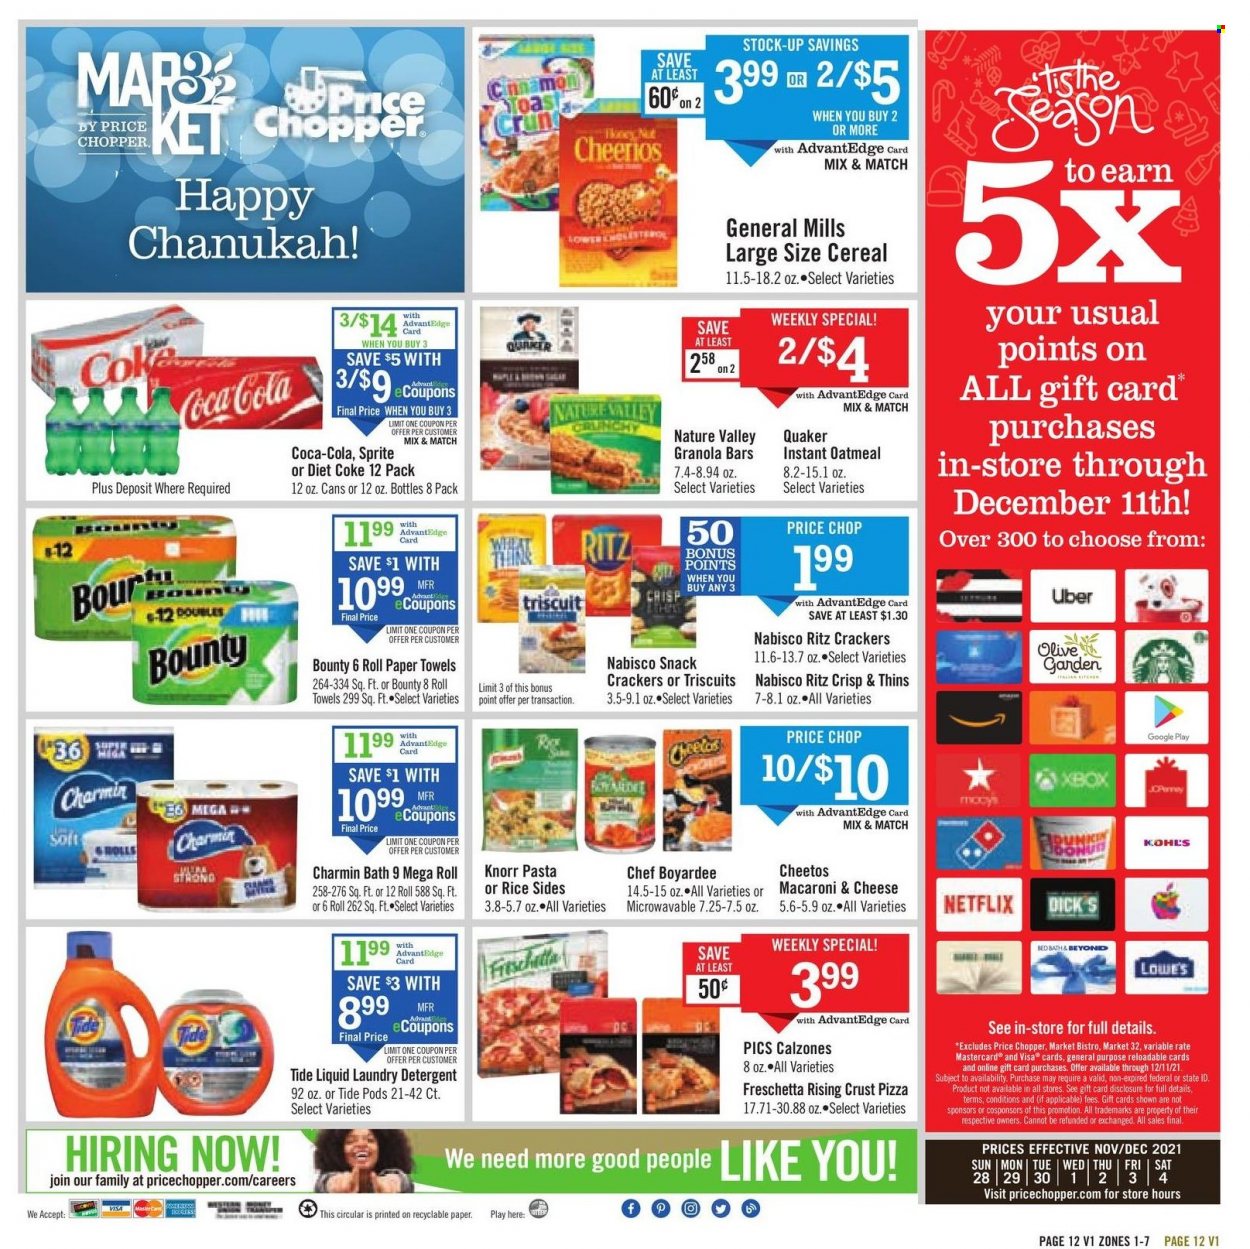 thumbnail - Price Chopper Flyer - 11/28/2021 - 12/04/2021 - Sales products - macaroni & cheese, pizza, Knorr, Quaker, snack, Bounty, crackers, RITZ, Cheetos, Thins, oatmeal, Chef Boyardee, cereals, Cheerios, granola bar, Nature Valley, rice, Coca-Cola, Sprite, Diet Coke, kitchen towels, paper towels, Charmin, detergent, Tide, laundry detergent. Page 12.